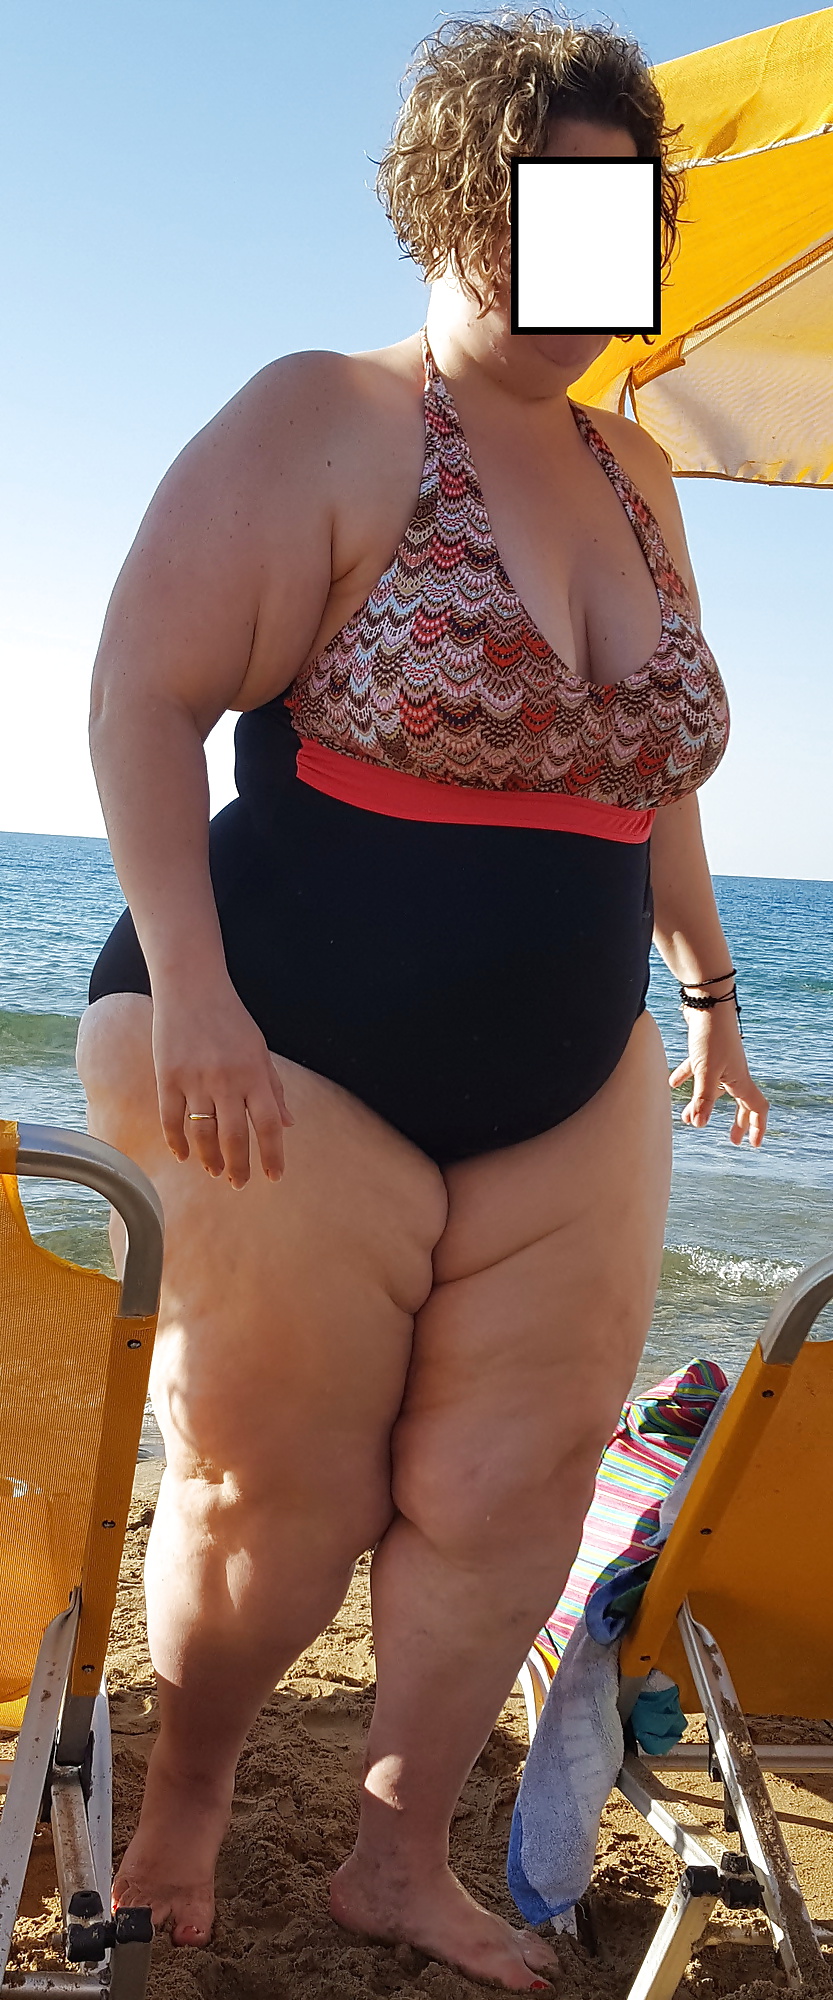 ssbbw mature amateur spied on the beach in swimsuit  (8/8)